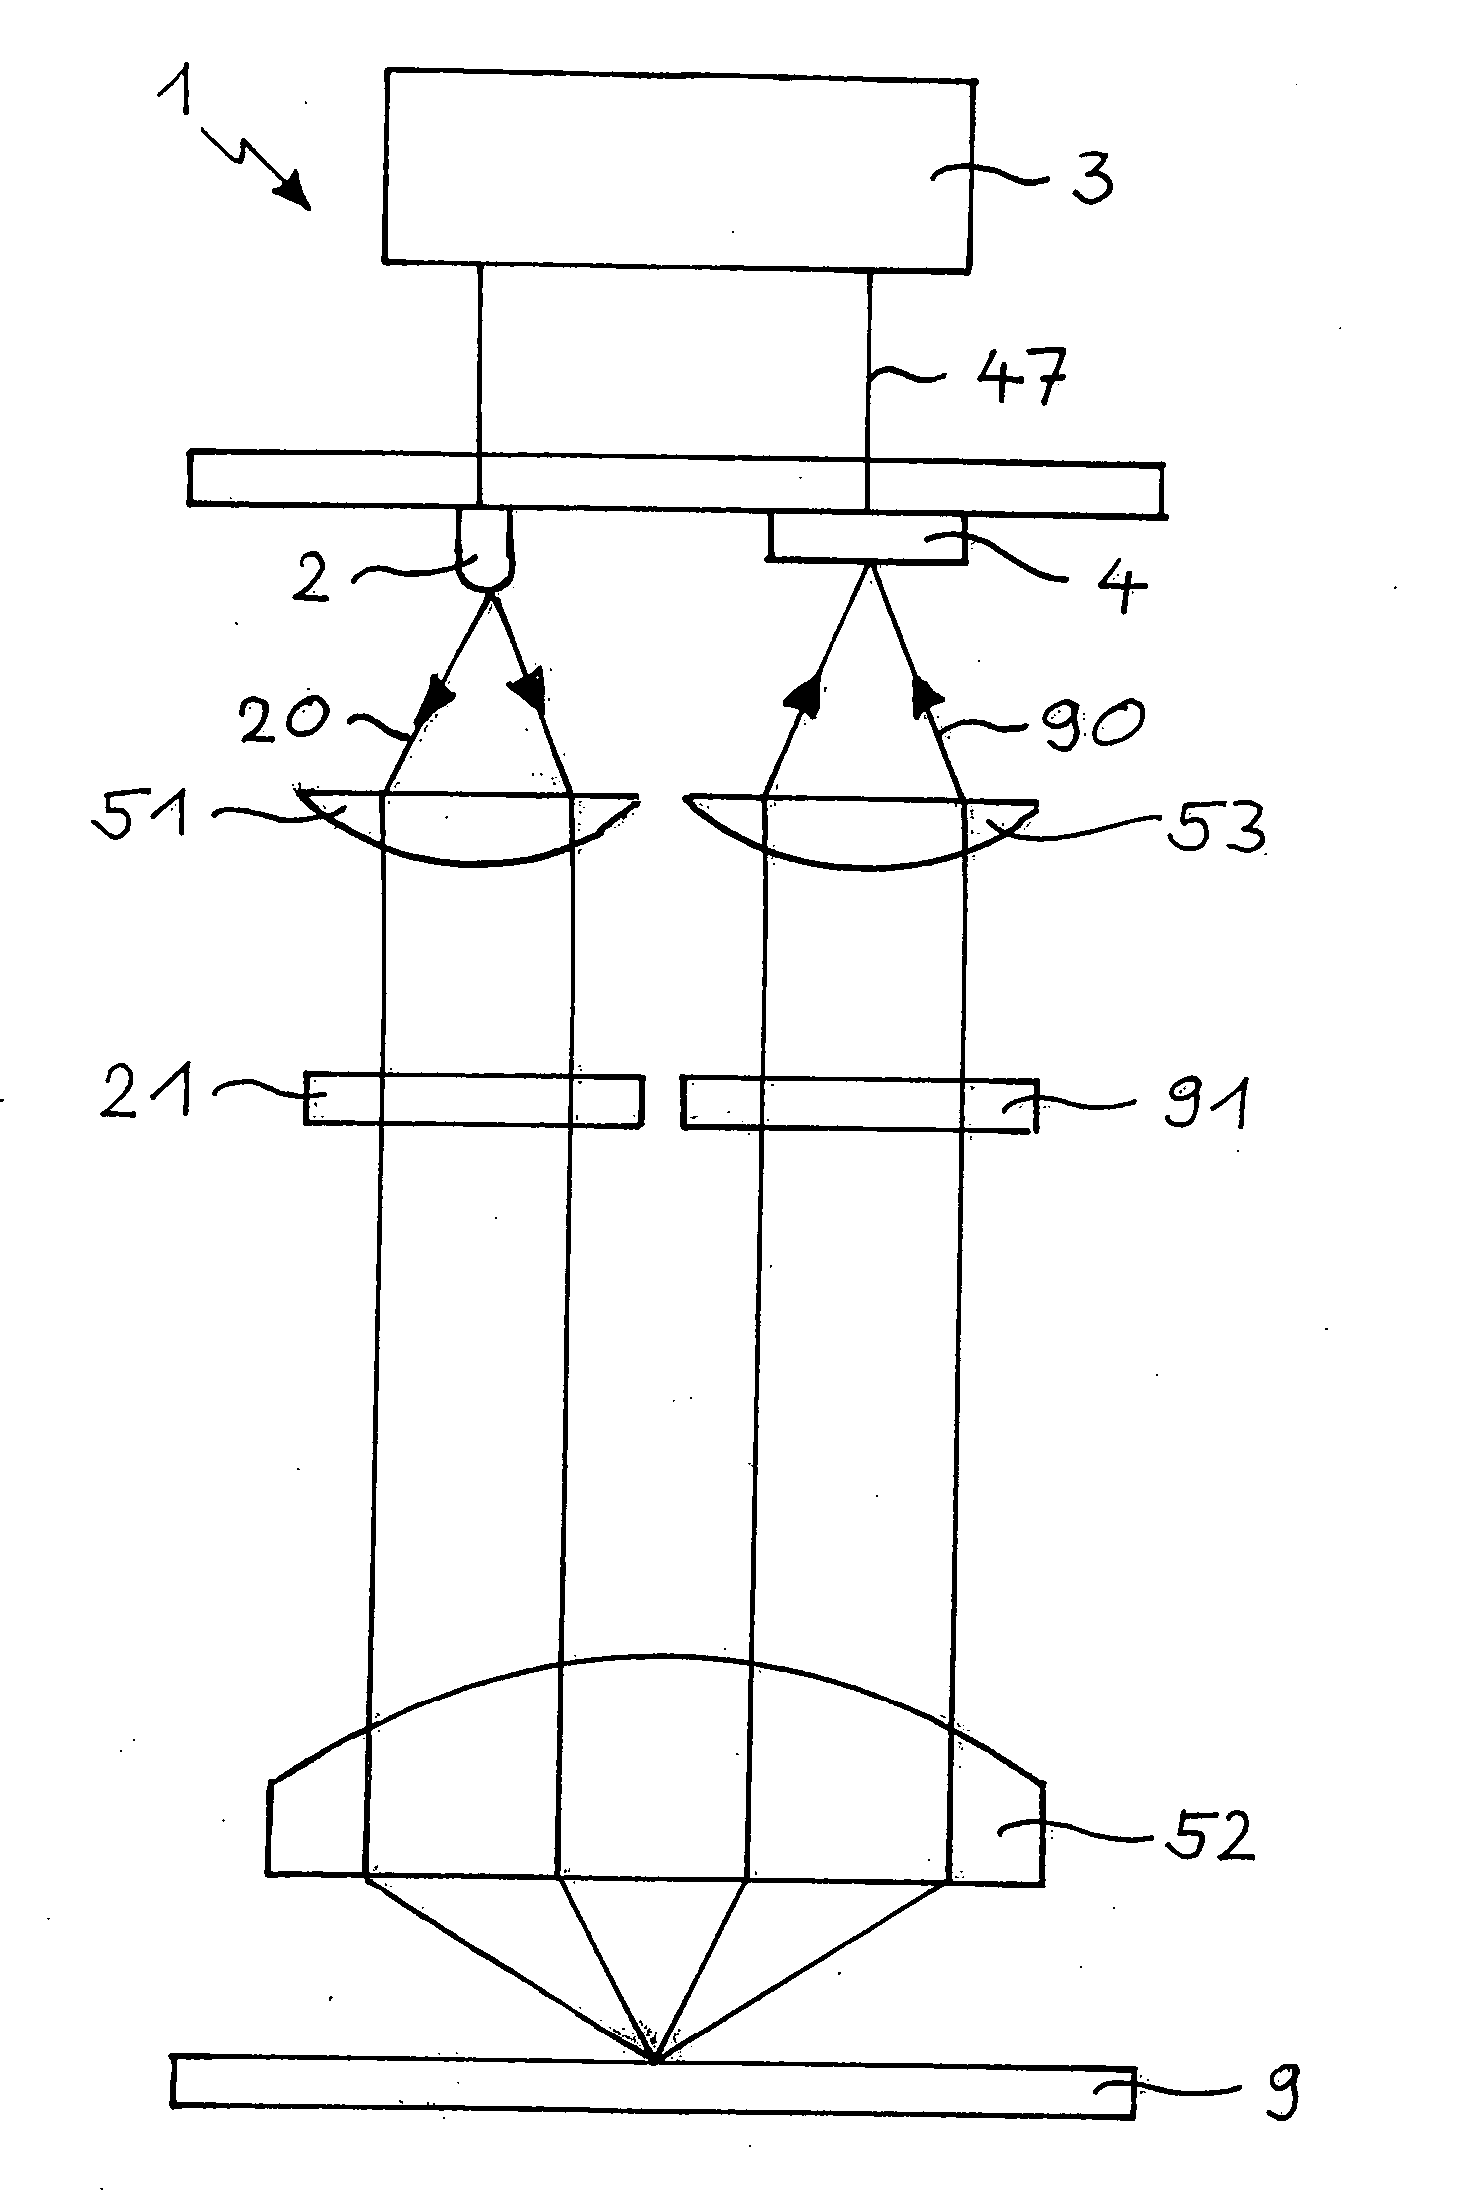 Apparatus and method for all-solid-state fluorescence lifetime imaging